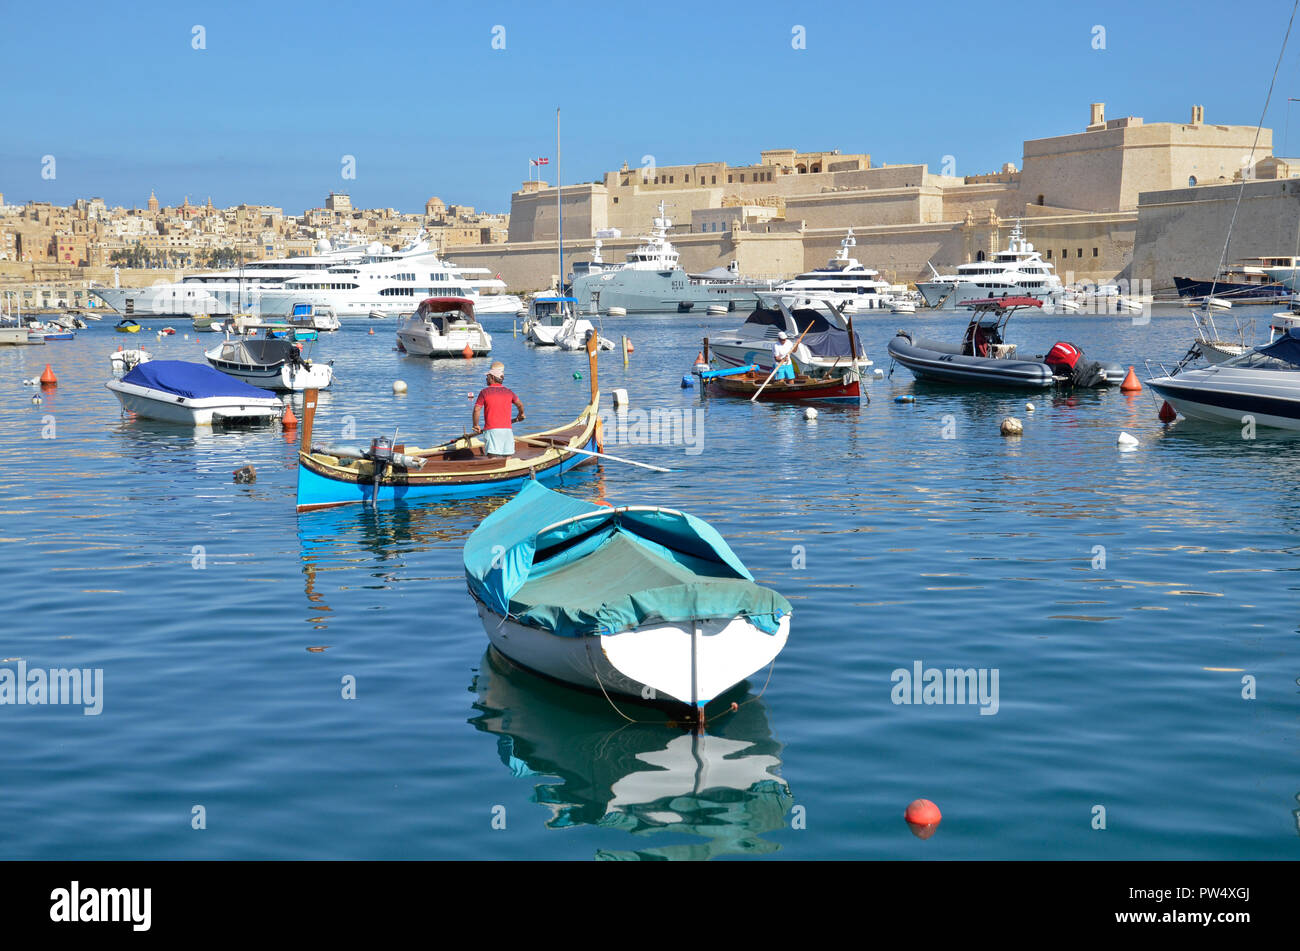 Boats on the Grand harbour in the Three Cities area of Malta Stock Photo